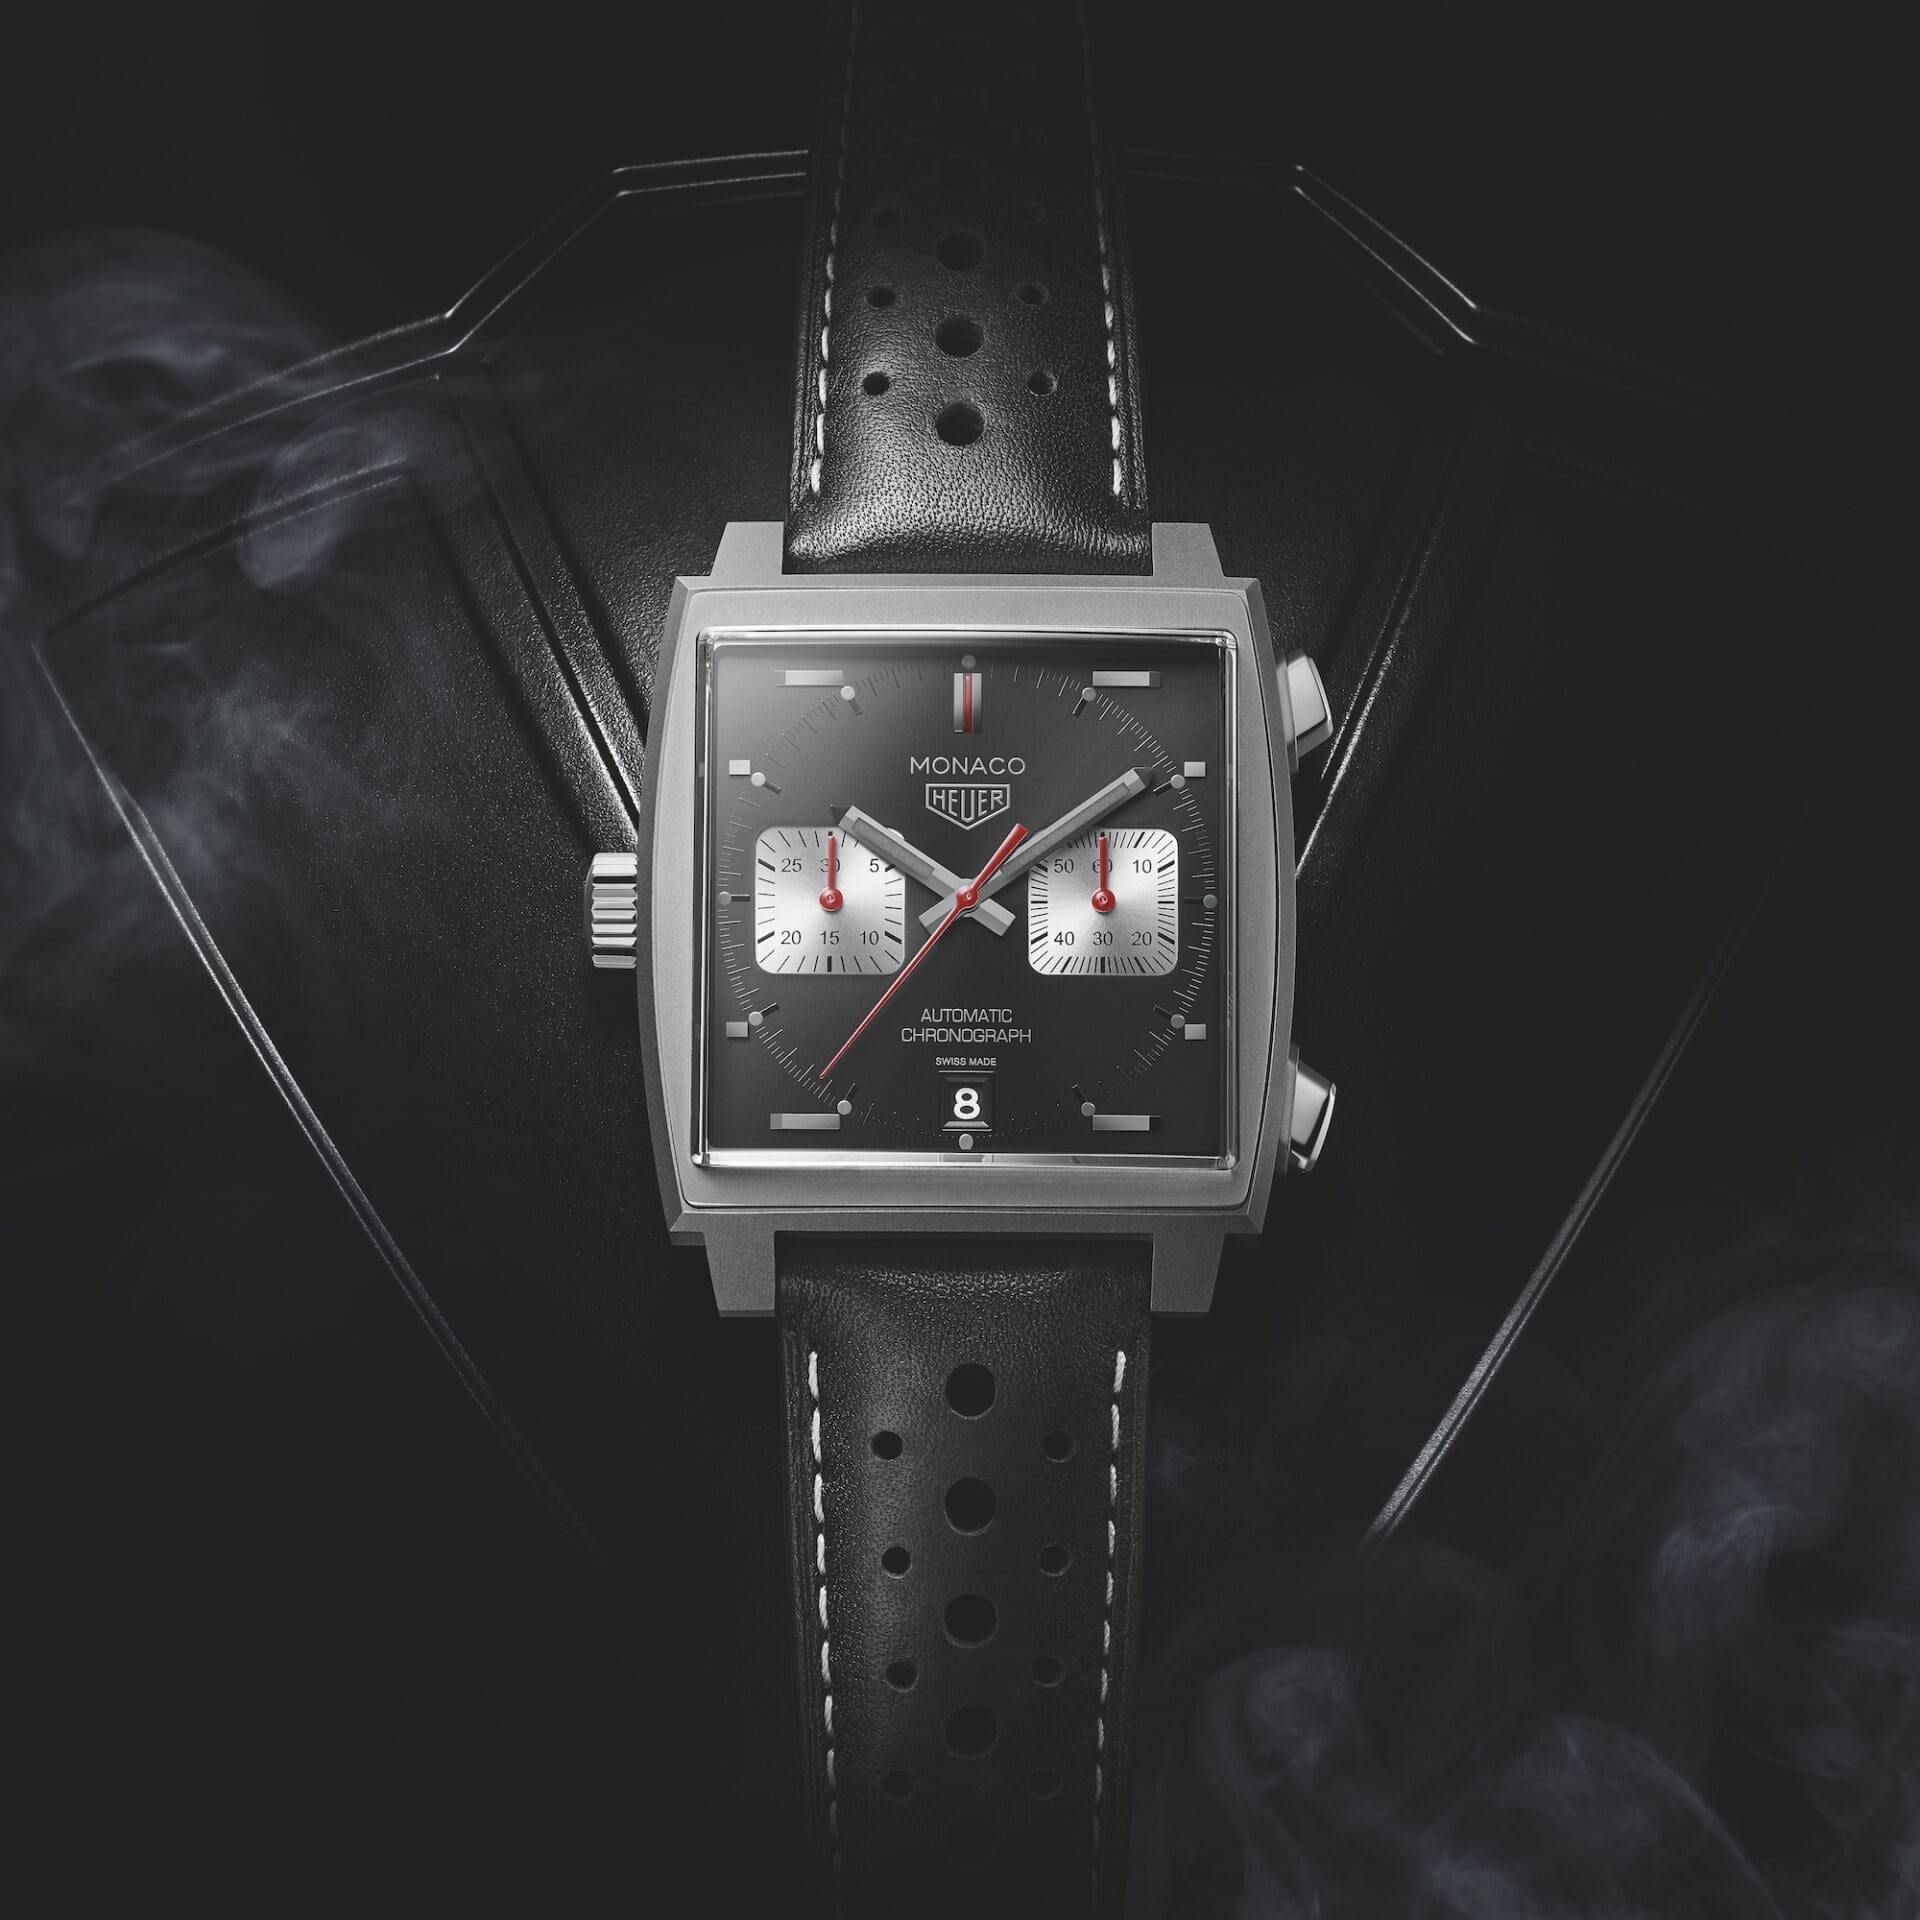 INTRODUCING: The TAG Heuer Monaco 2009-2019 Limited Edition